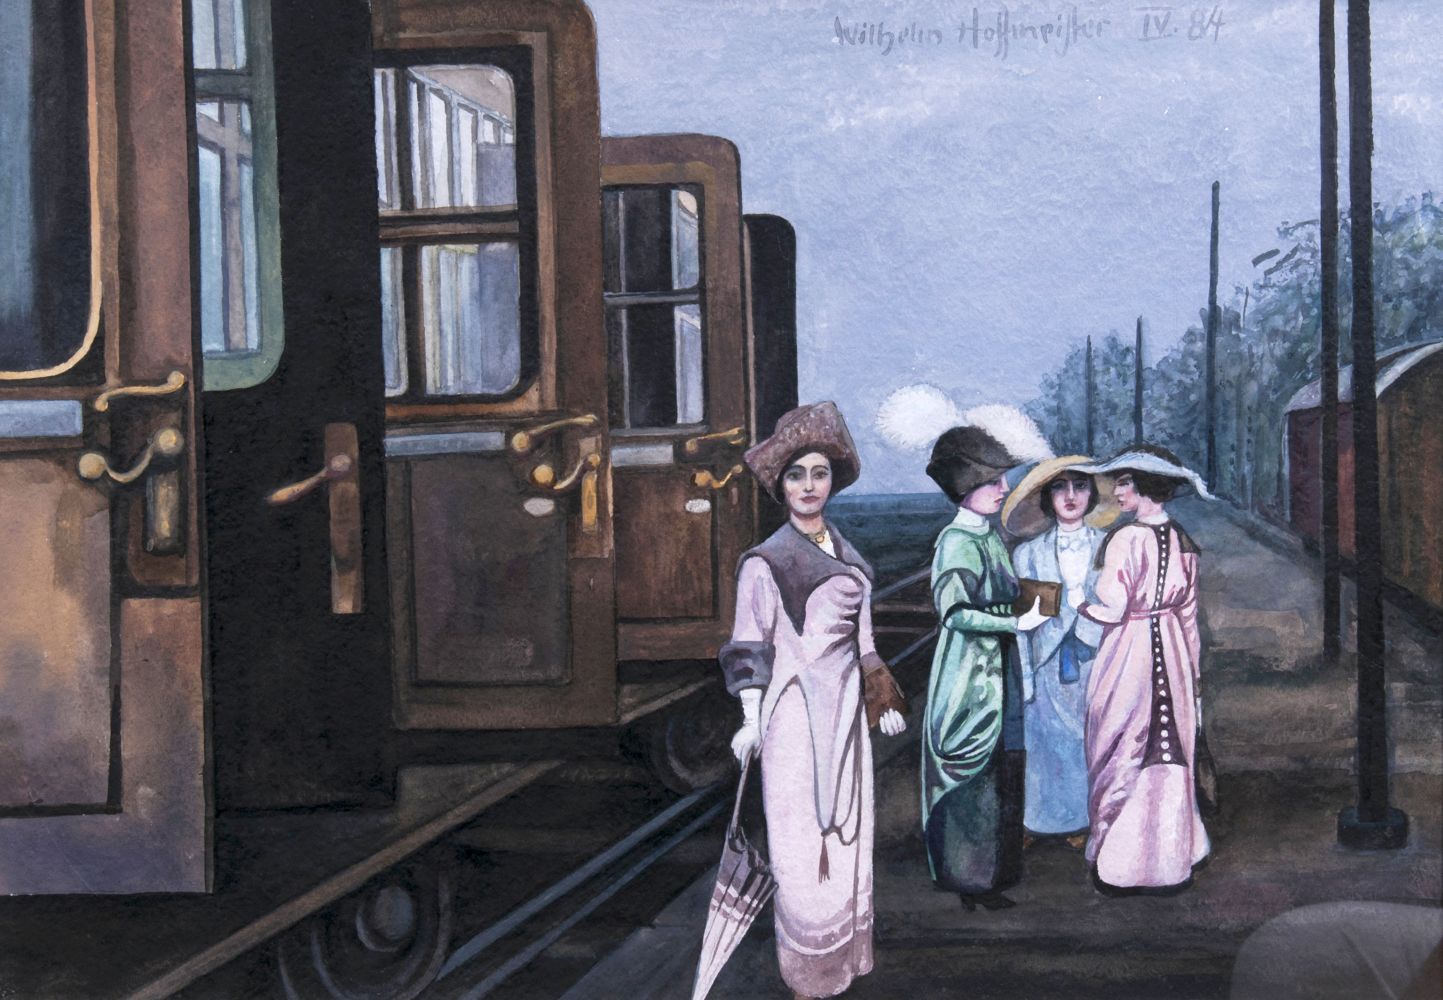 Ladies in a Station